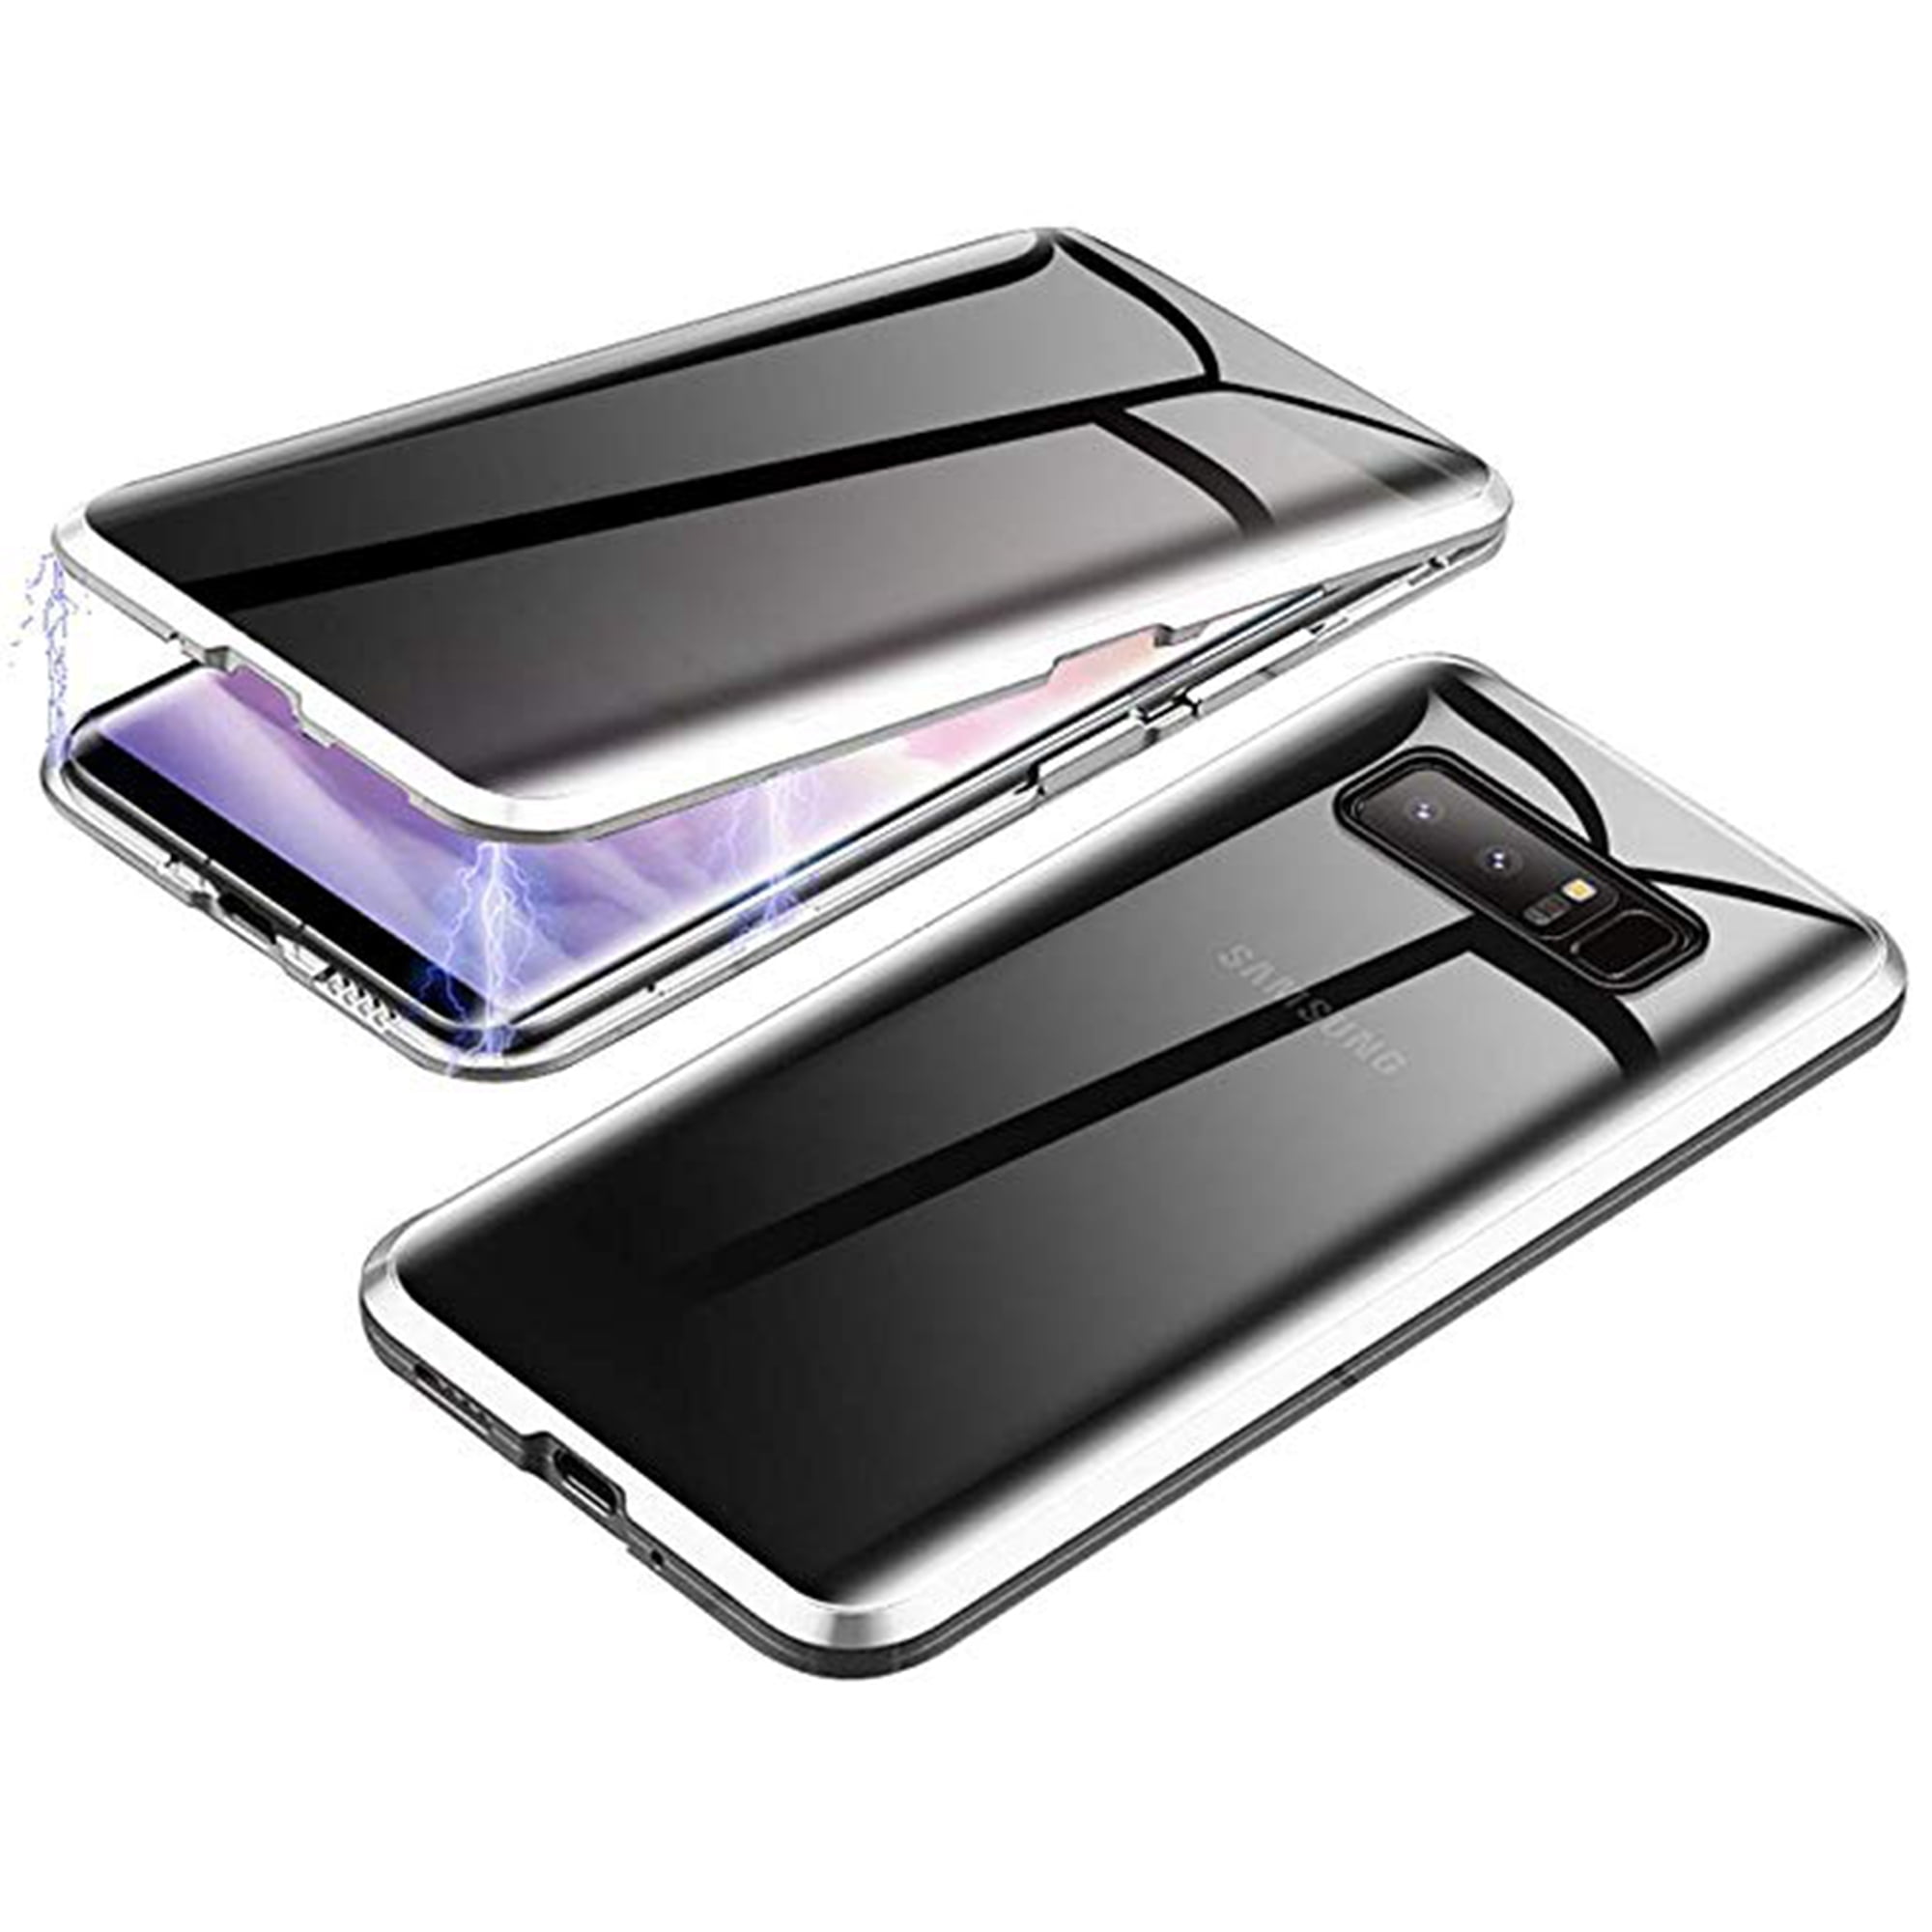 Vsmano Galaxy S10 Magnetic case 360° Transparent Tempered Glass Shockproof Magnetic Adsorption Metal Bumper Flip Cover 